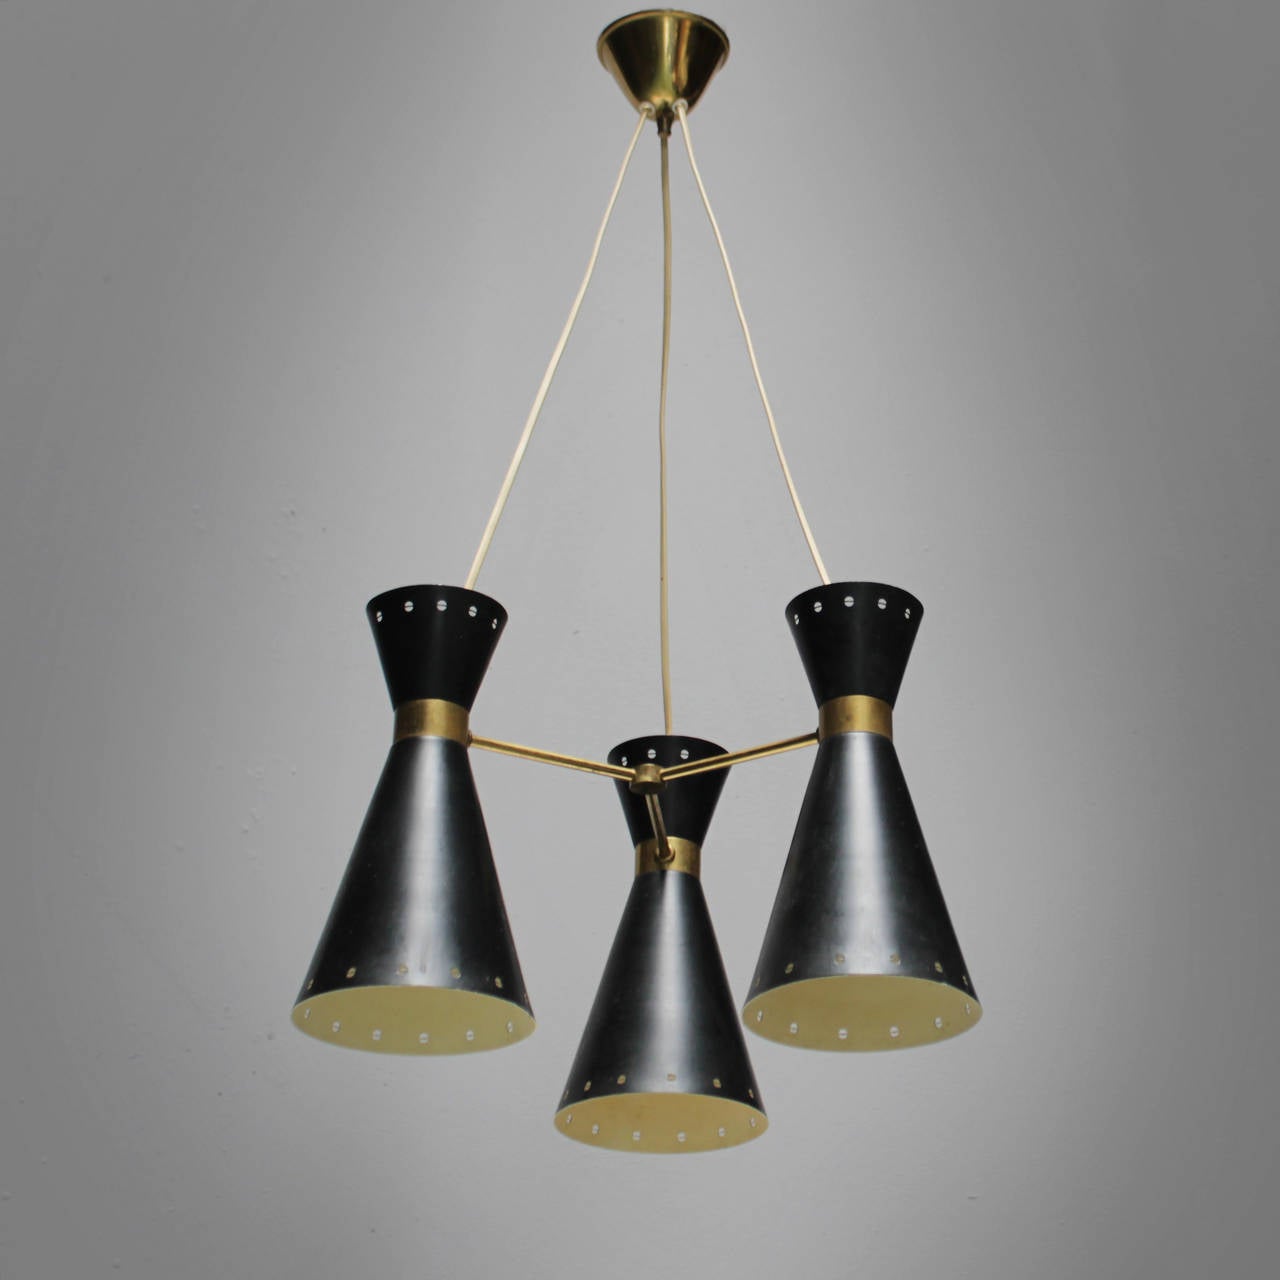 Swedish diabolo chandelier with three lights and a brass canopy. Black lacquered metal with brass connections.
Total height from ceiling till drop: 30.1 in. (78 cm), total diameter 14.9 in. (38 cm). Height of a light: 11.0 in. (28 cm), diameter of